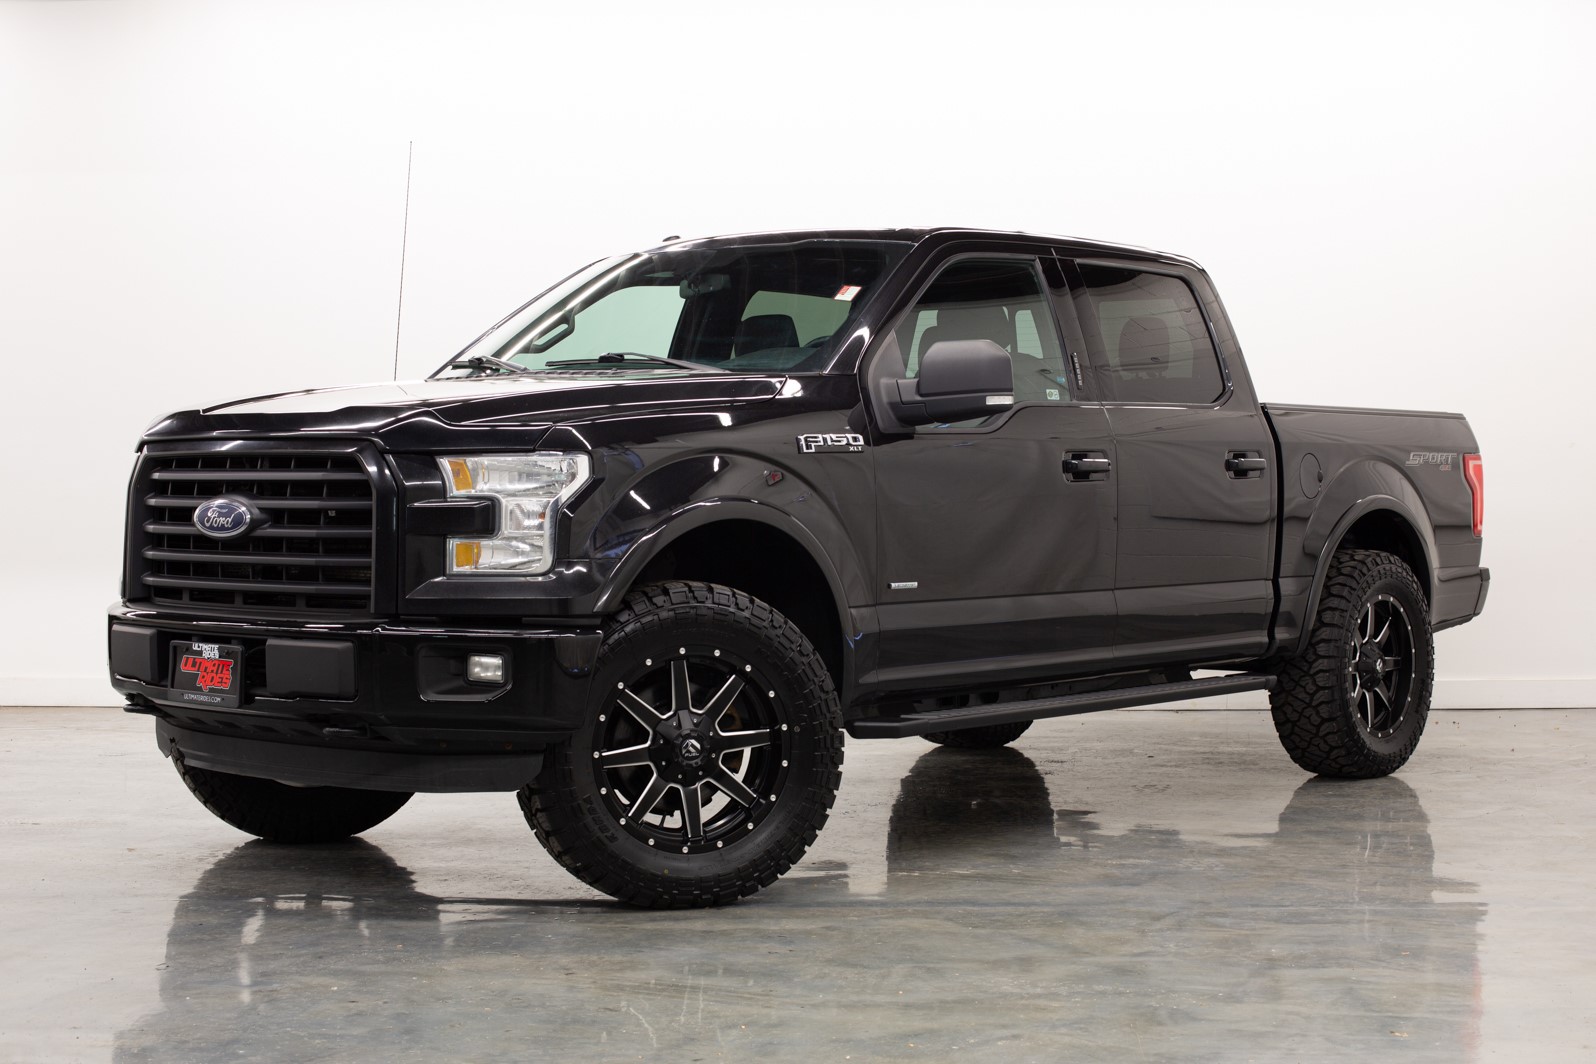 2015 FORD F150 SUPERCREW XLT 4X4 | Ultimate Rides